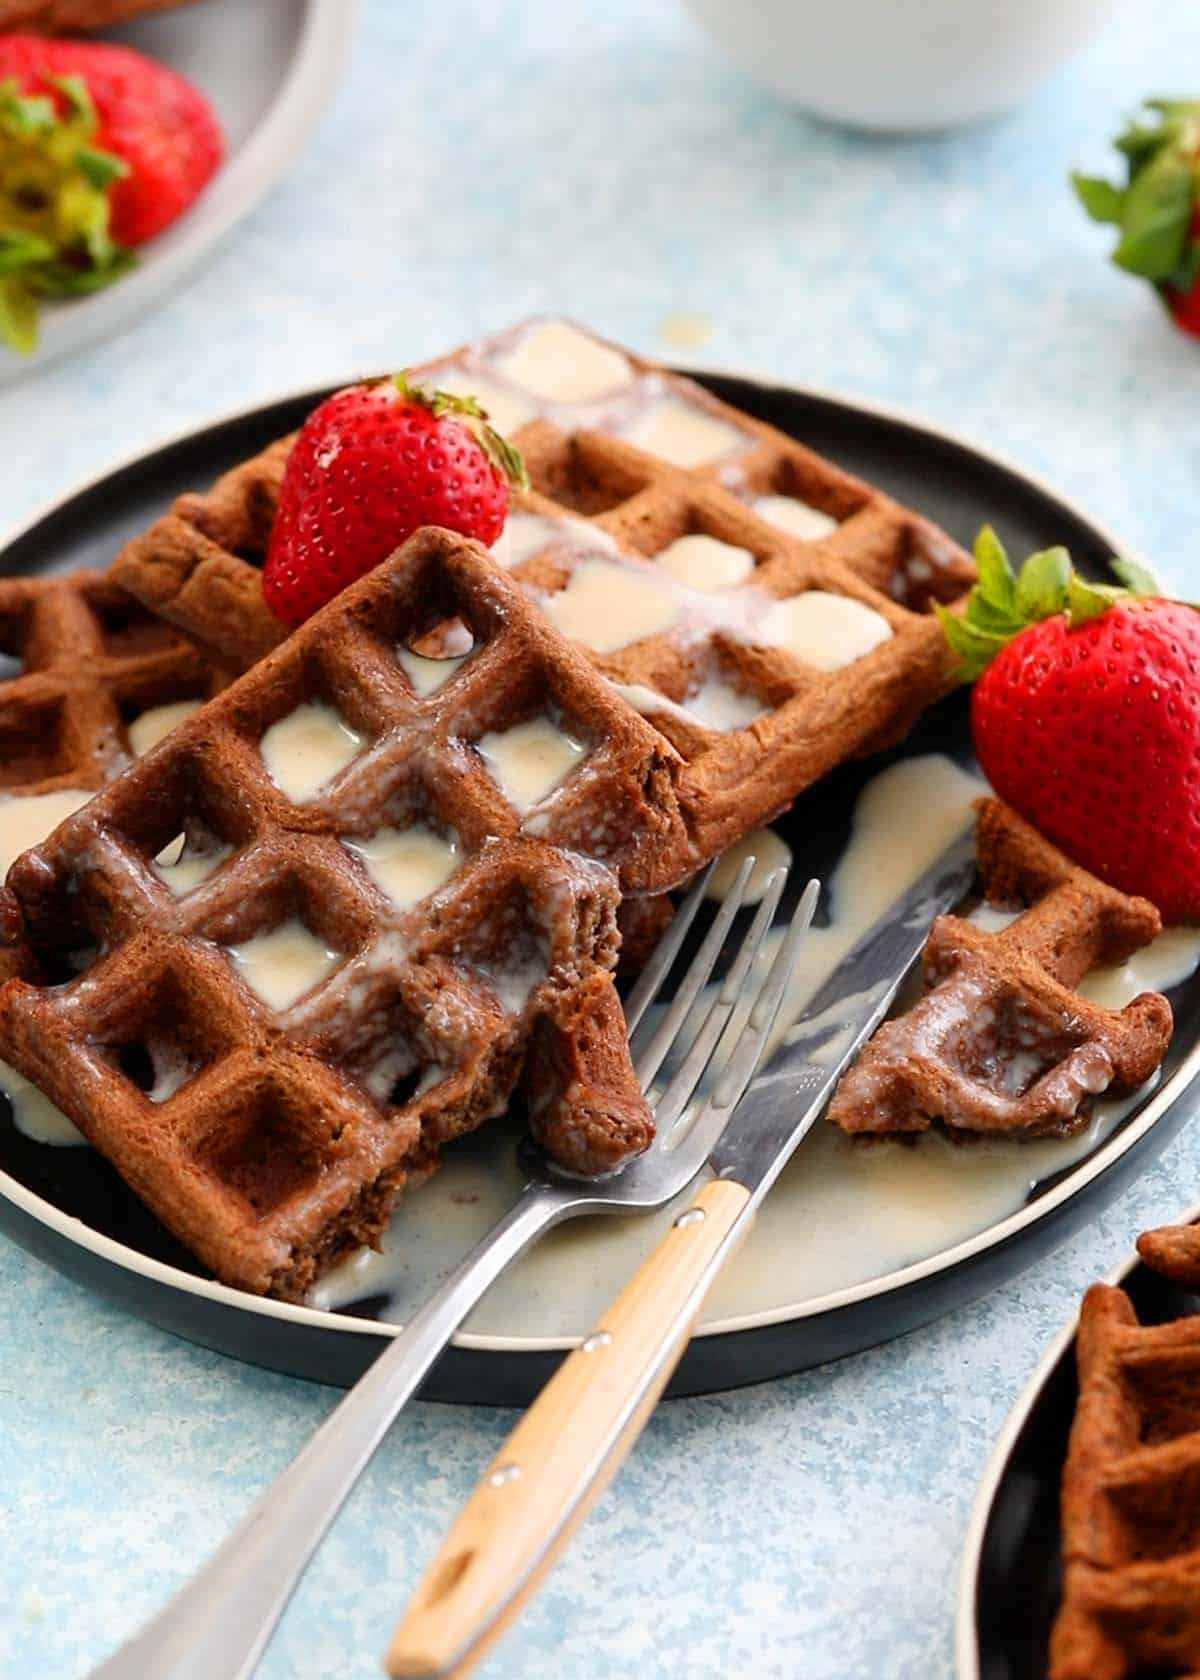 three brown chocolate waffles along with a fork and knife on a round black plate.